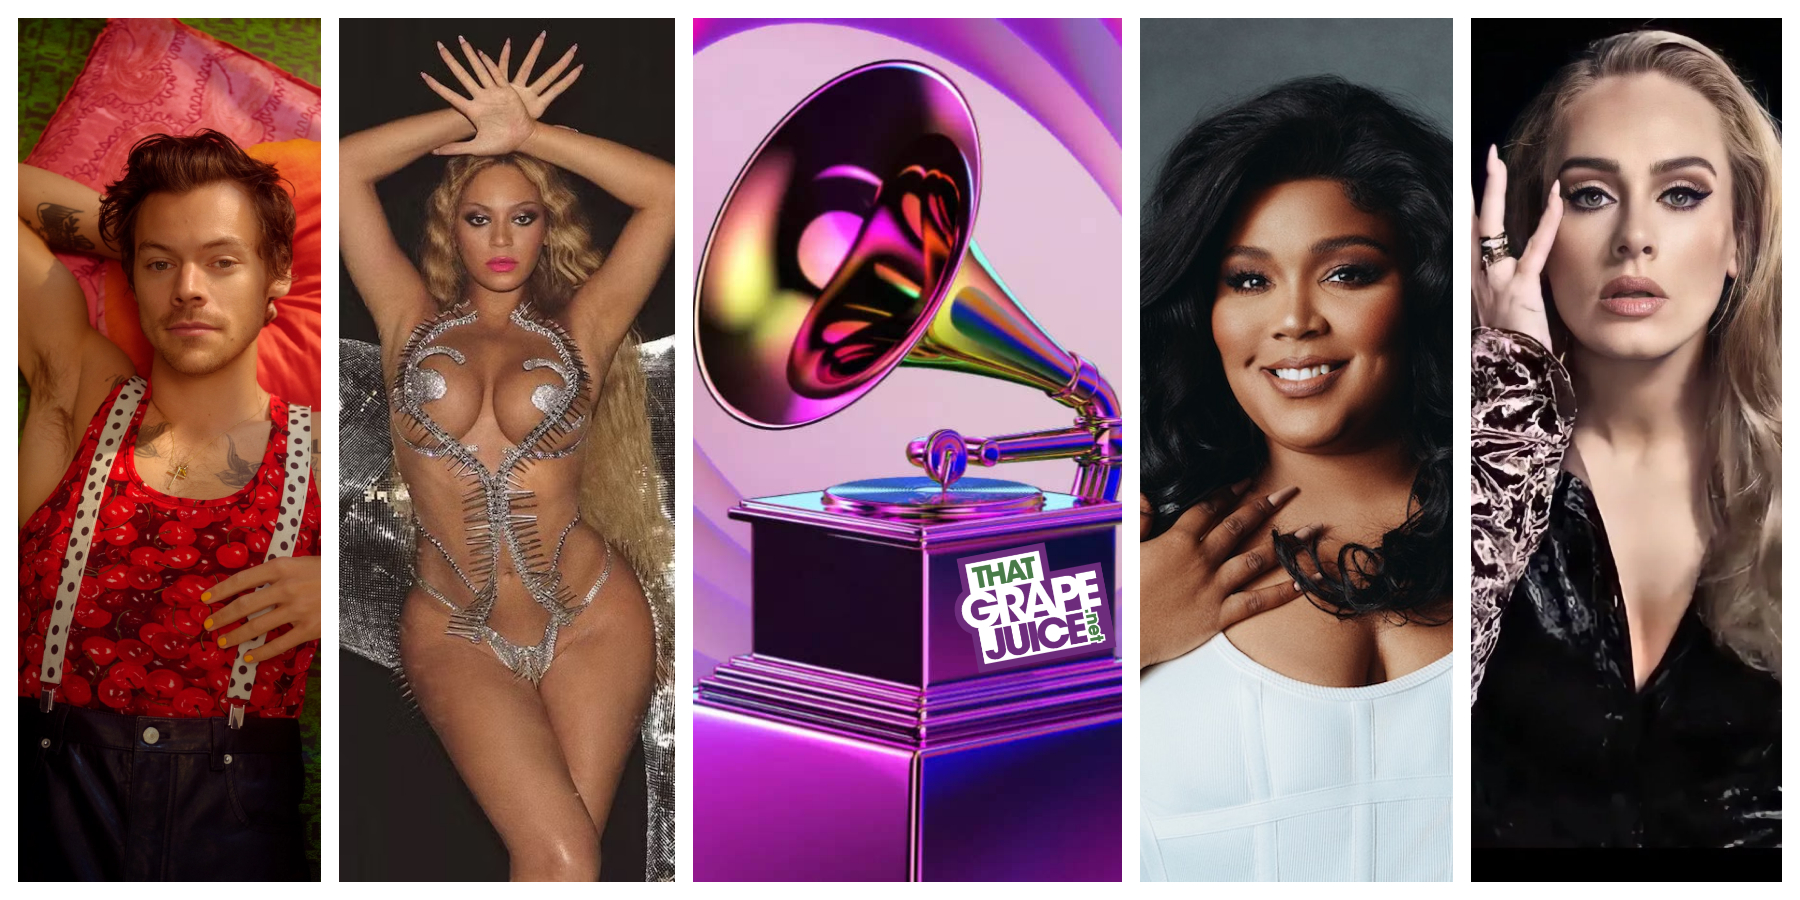 Must See 65th Annual GRAMMY Nominations [Full List] That Grape Juice